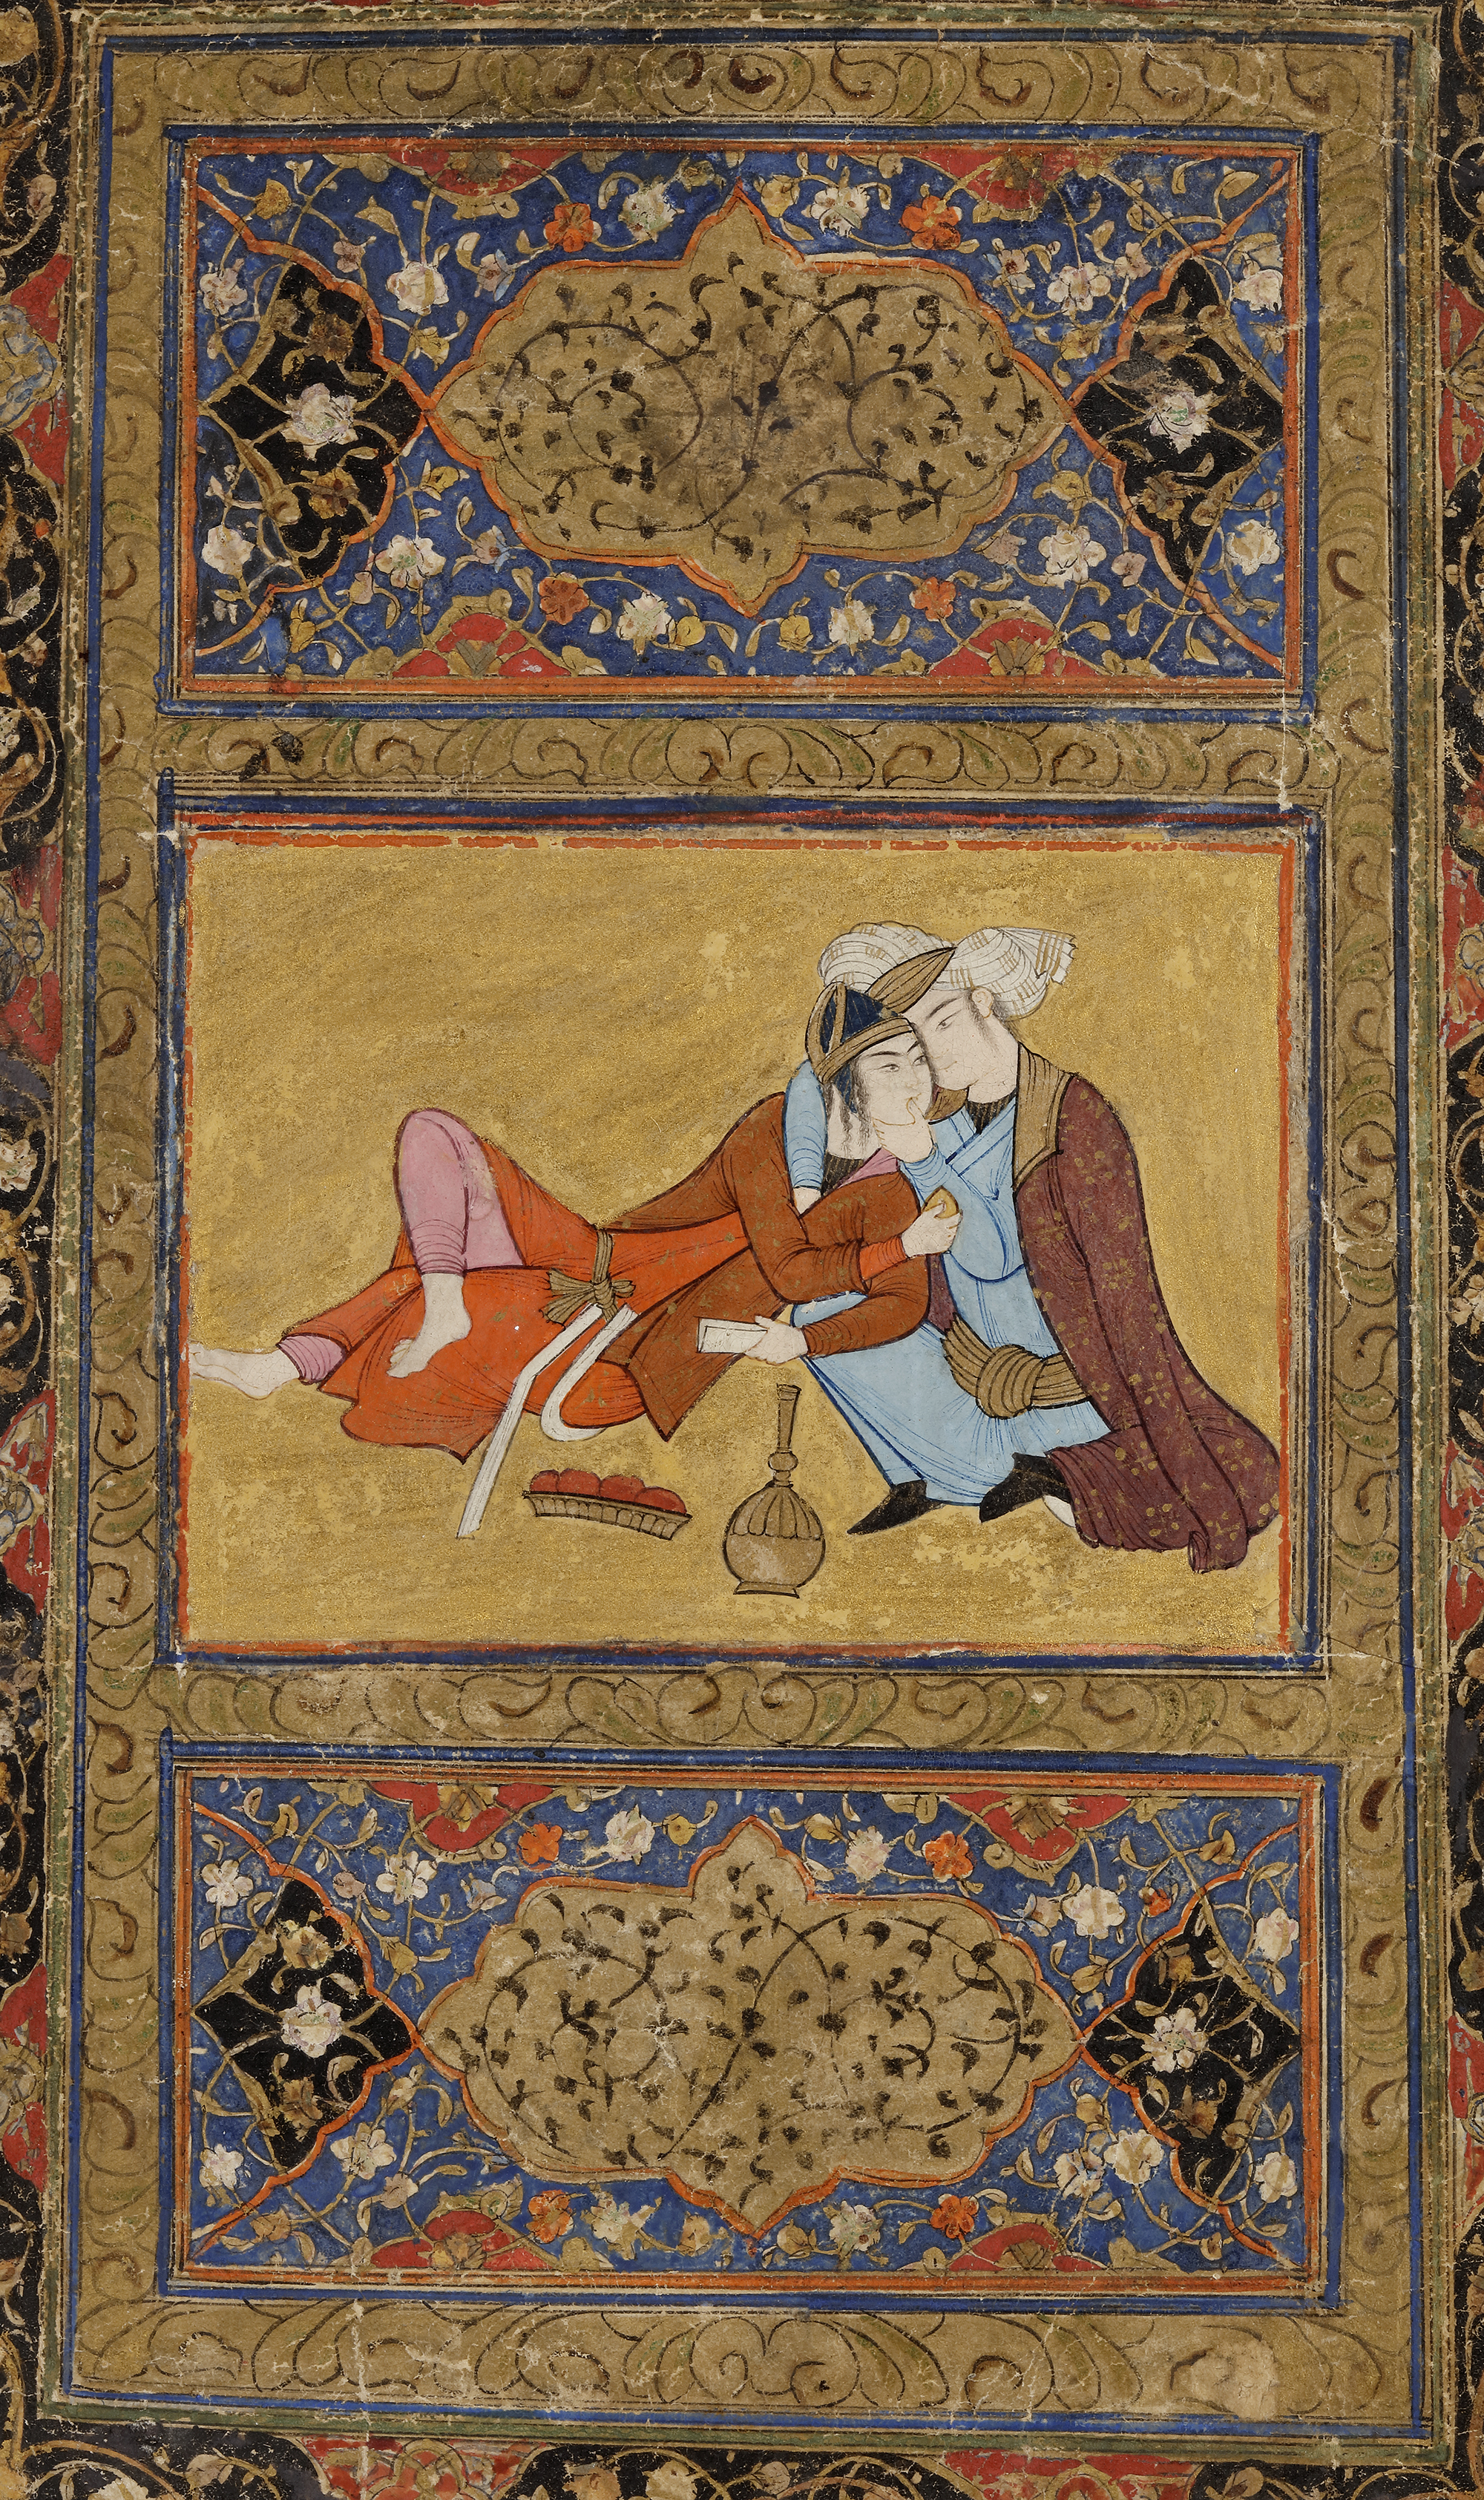 AN EMBRACING COUPLE, PERSIA, SAFAVID, 17TH CENTURY - Image 3 of 4